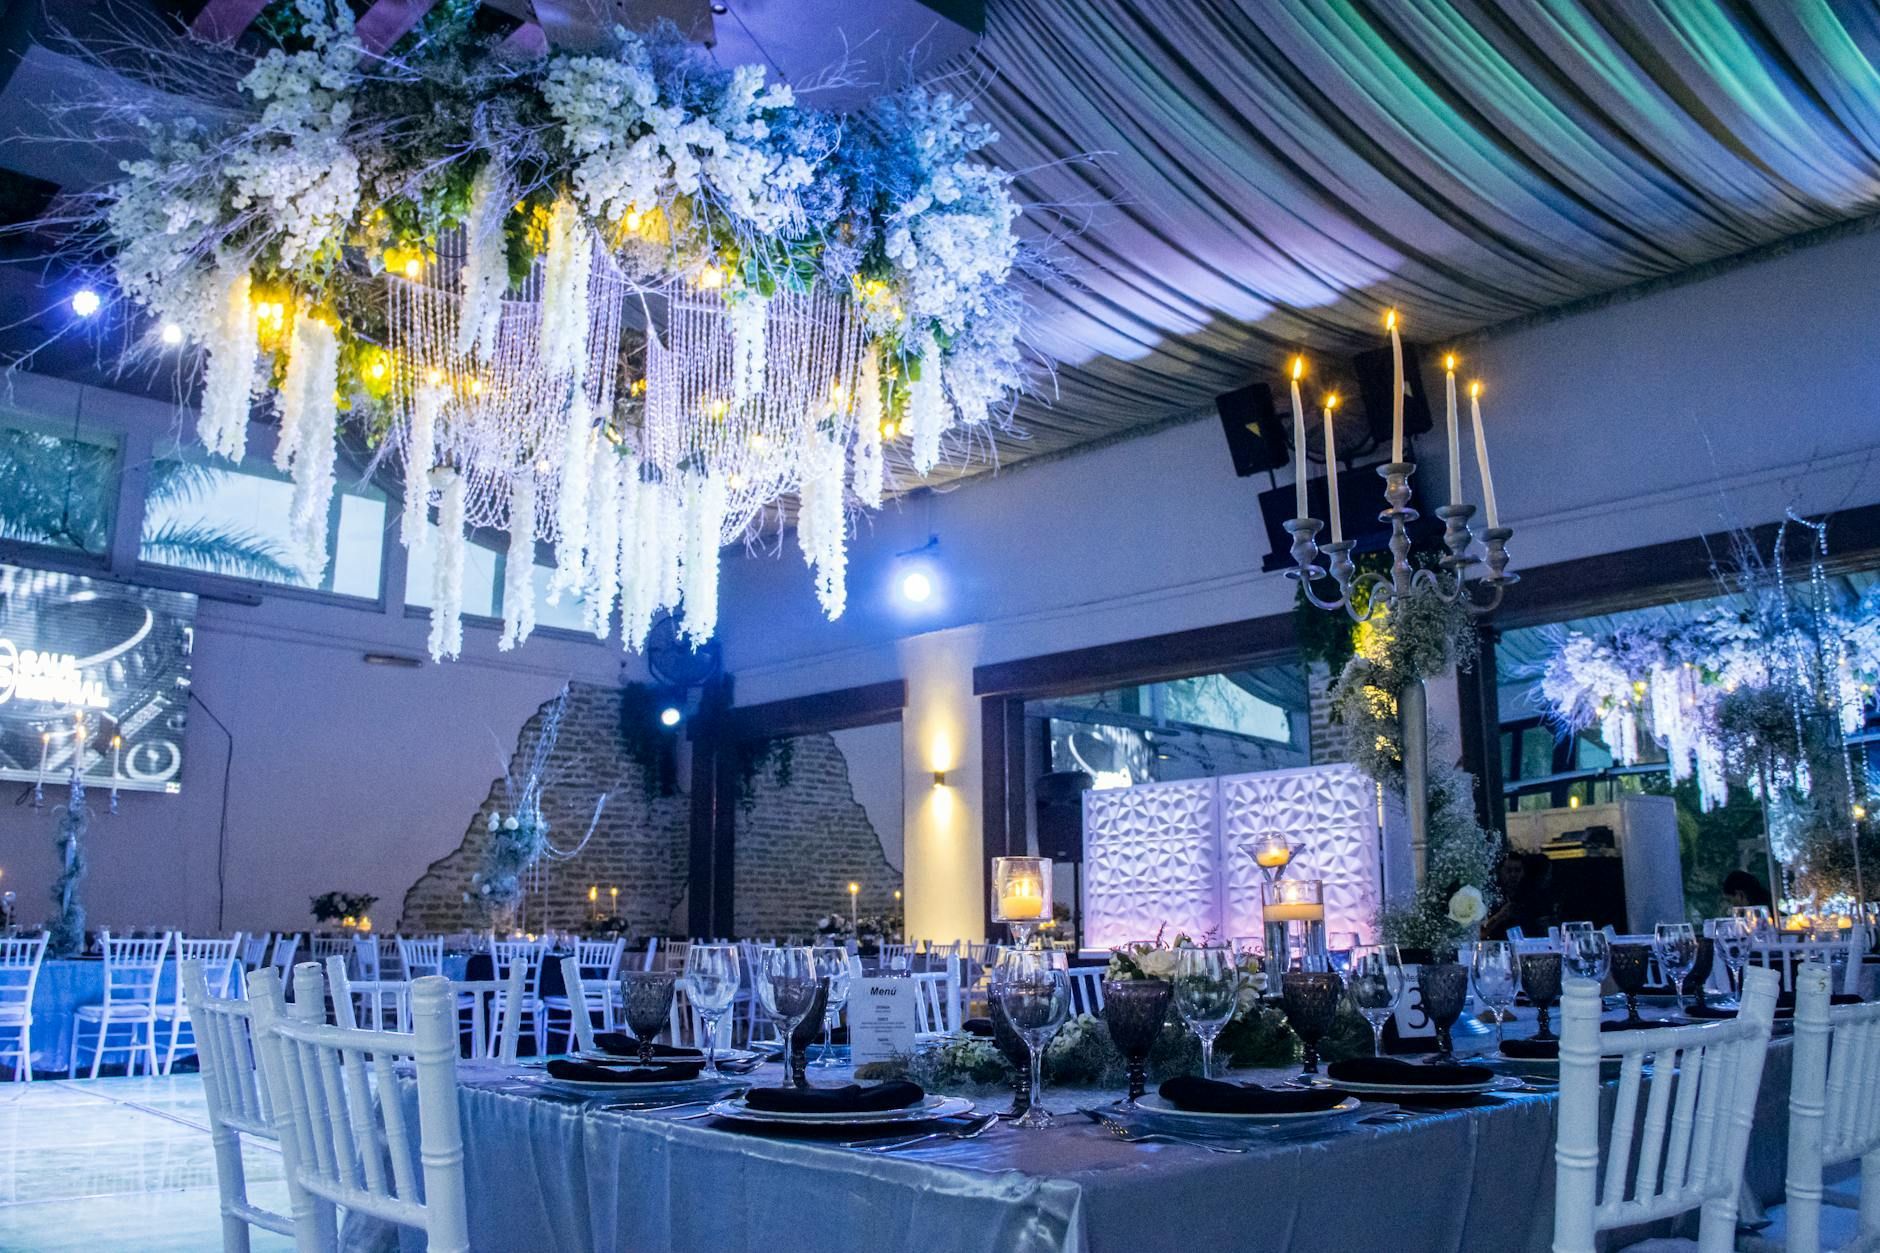 A sophisticated party events venue illuminating with blue lights celebrating a fun party.